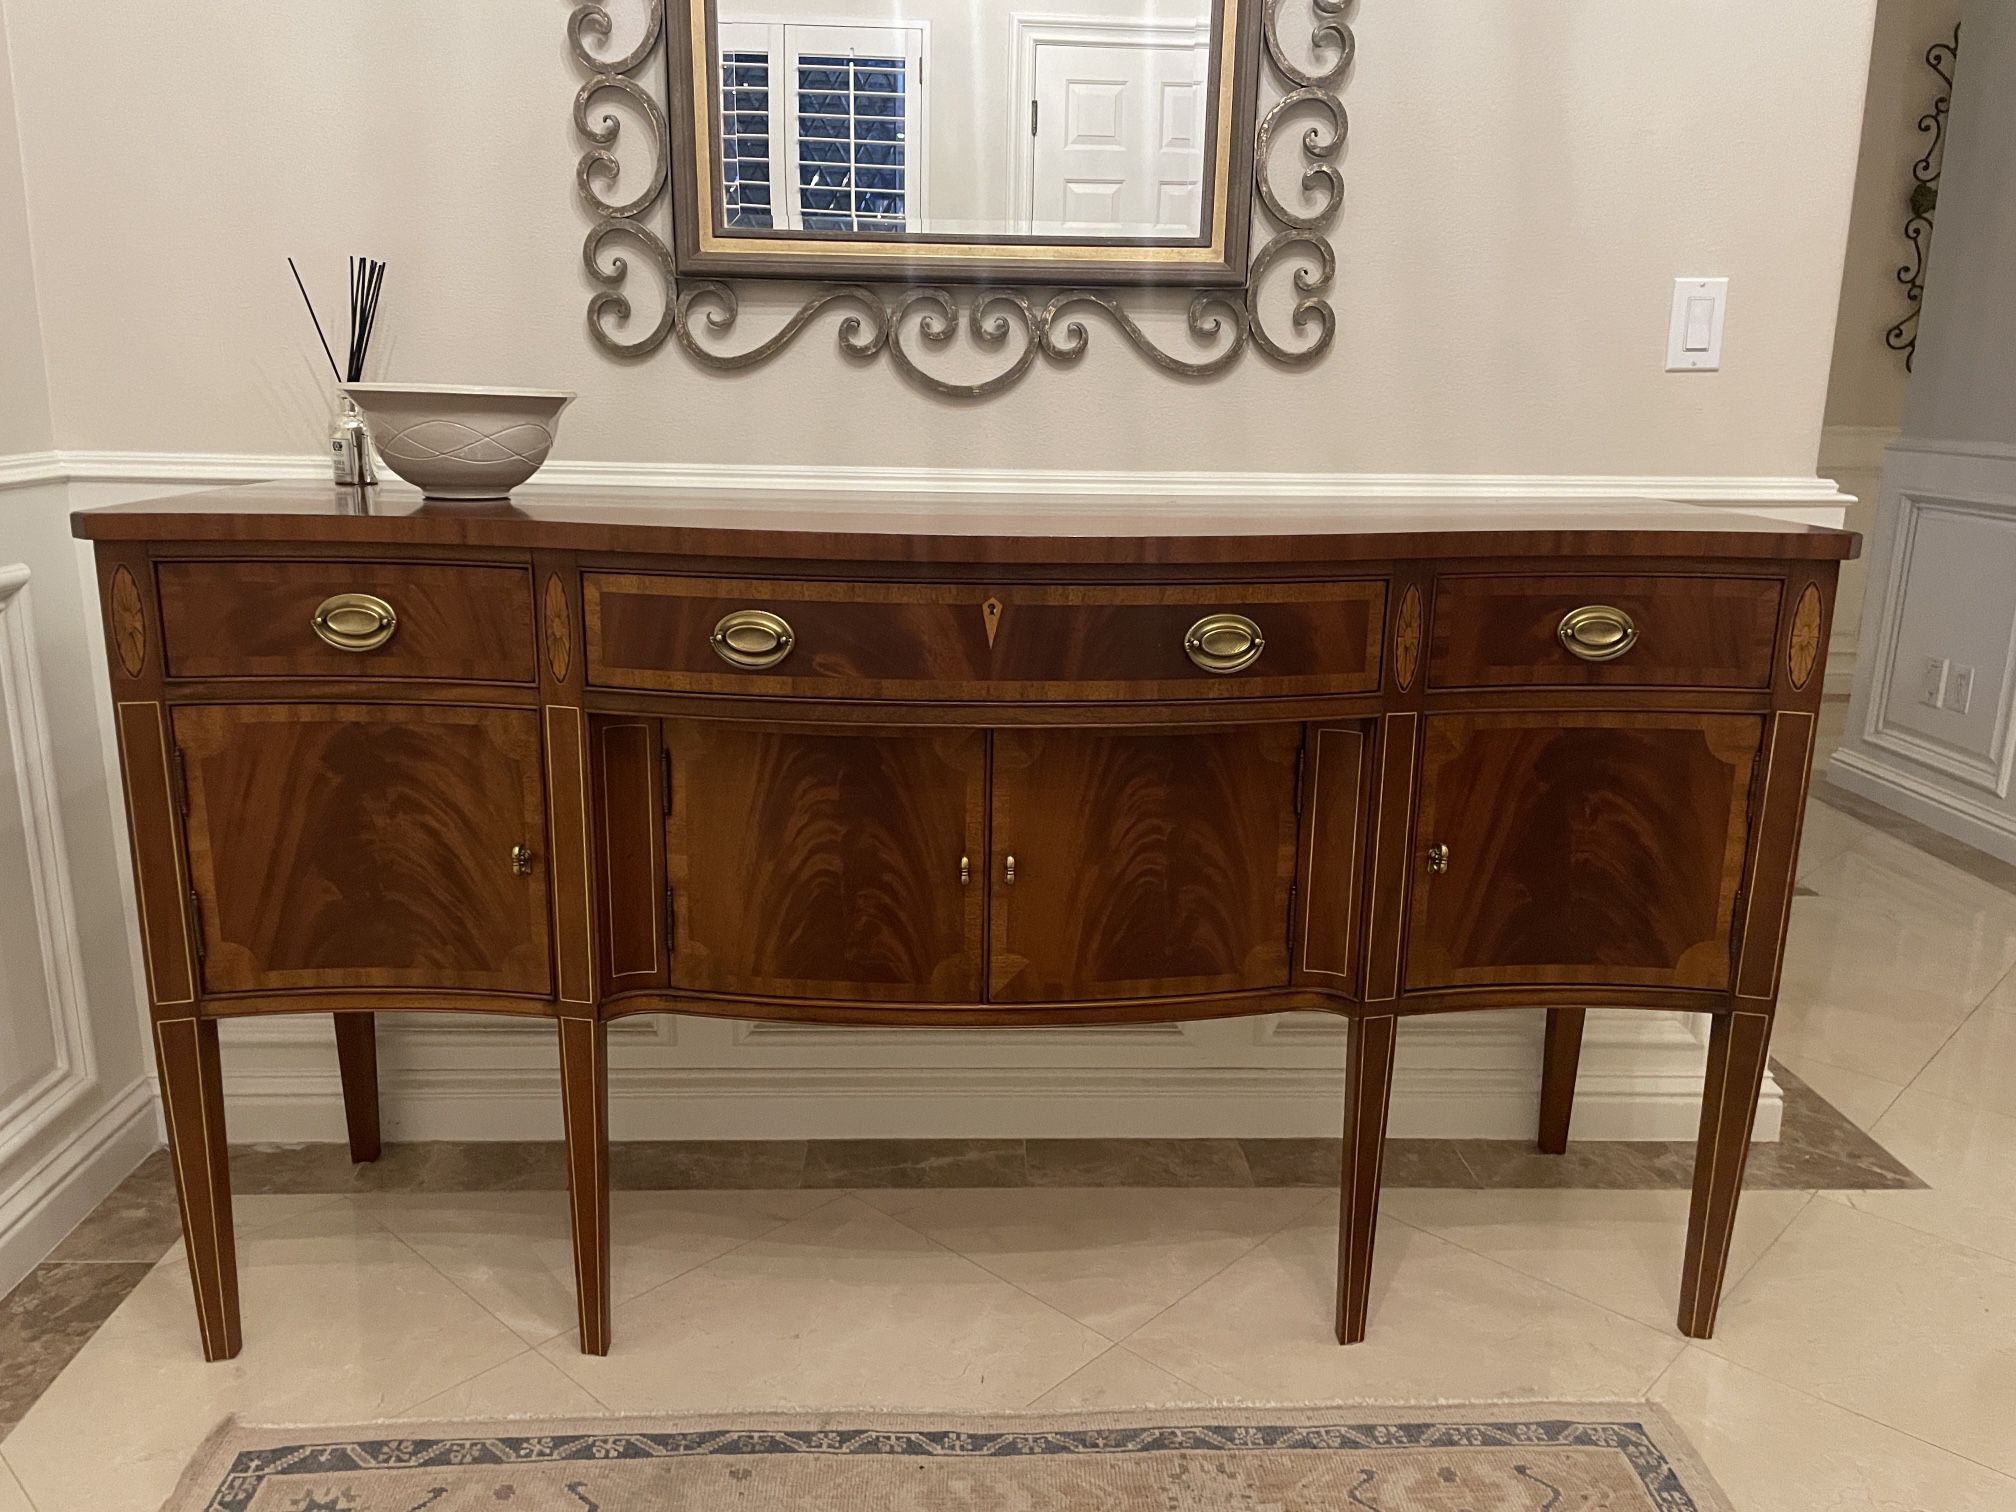 20th Century Hickory Chair Mahogany Sideboard (Open To Offers)